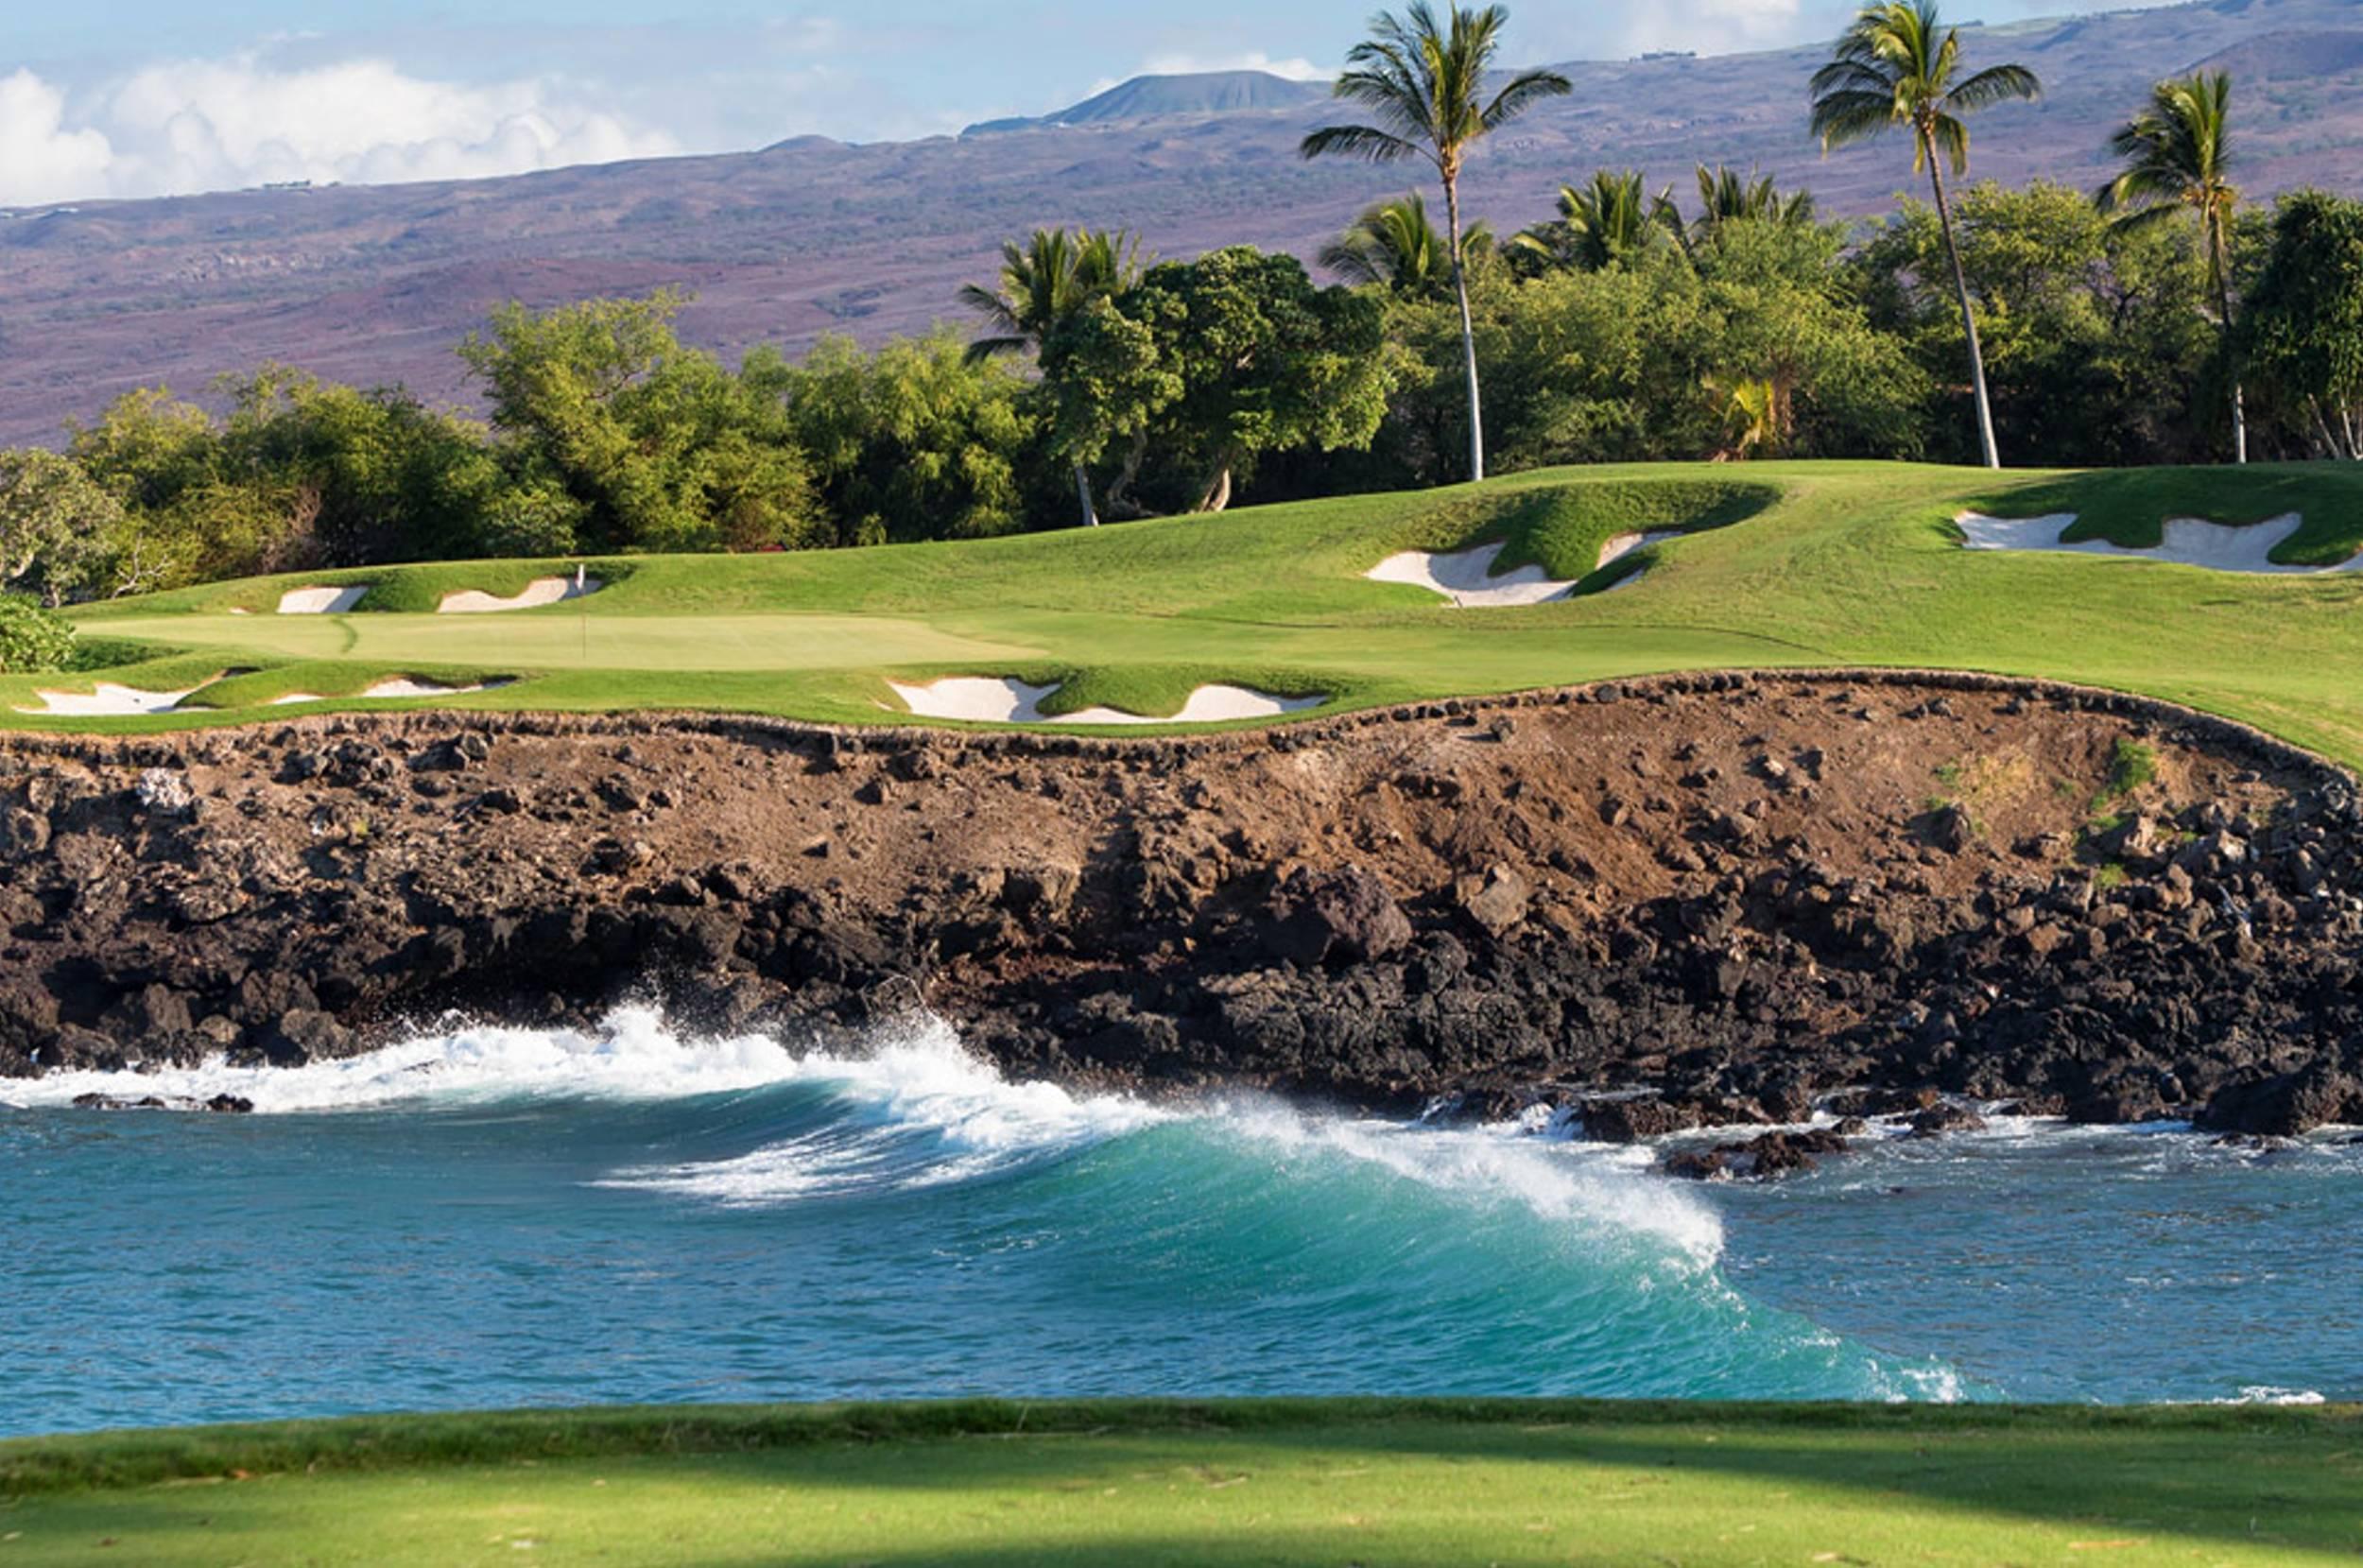 Gallery for - hawaii golf course wallpaper